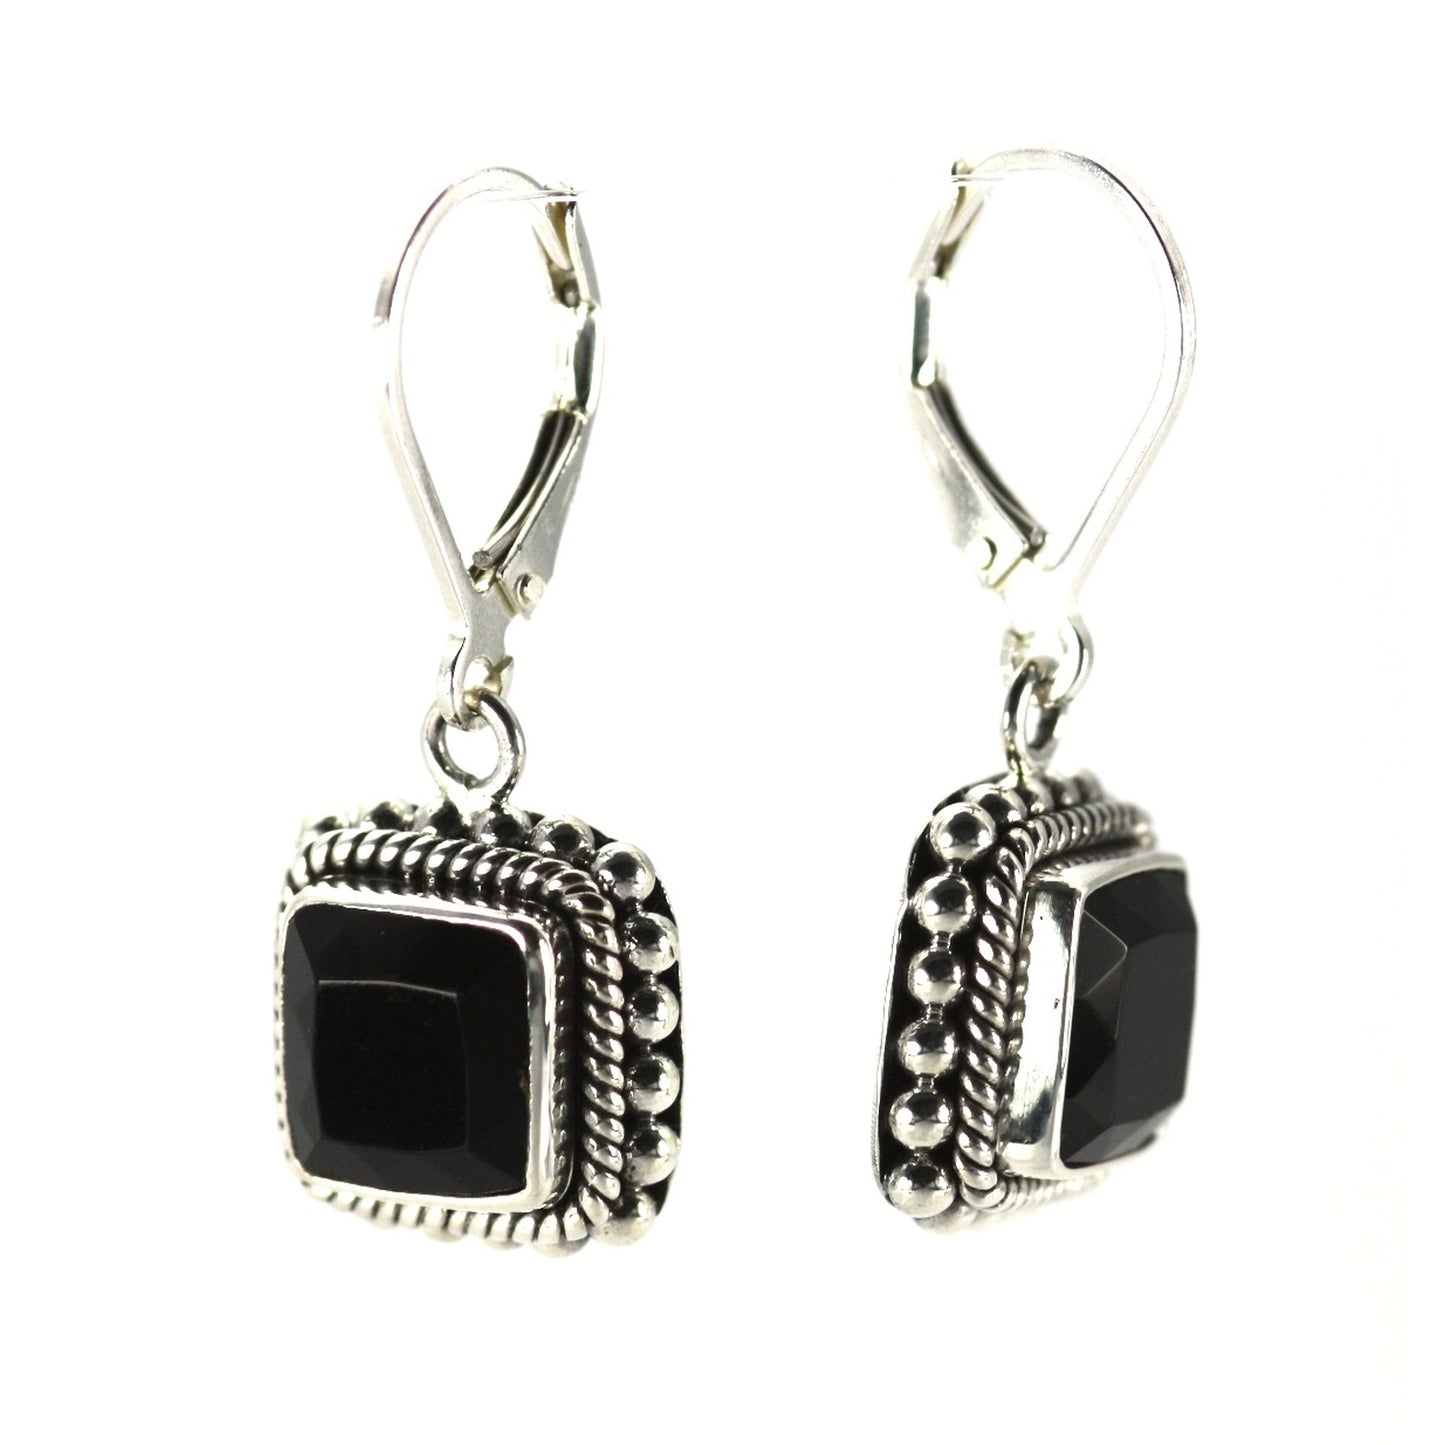 Silver earrings with square onyx gemstones and rope and bead settings.